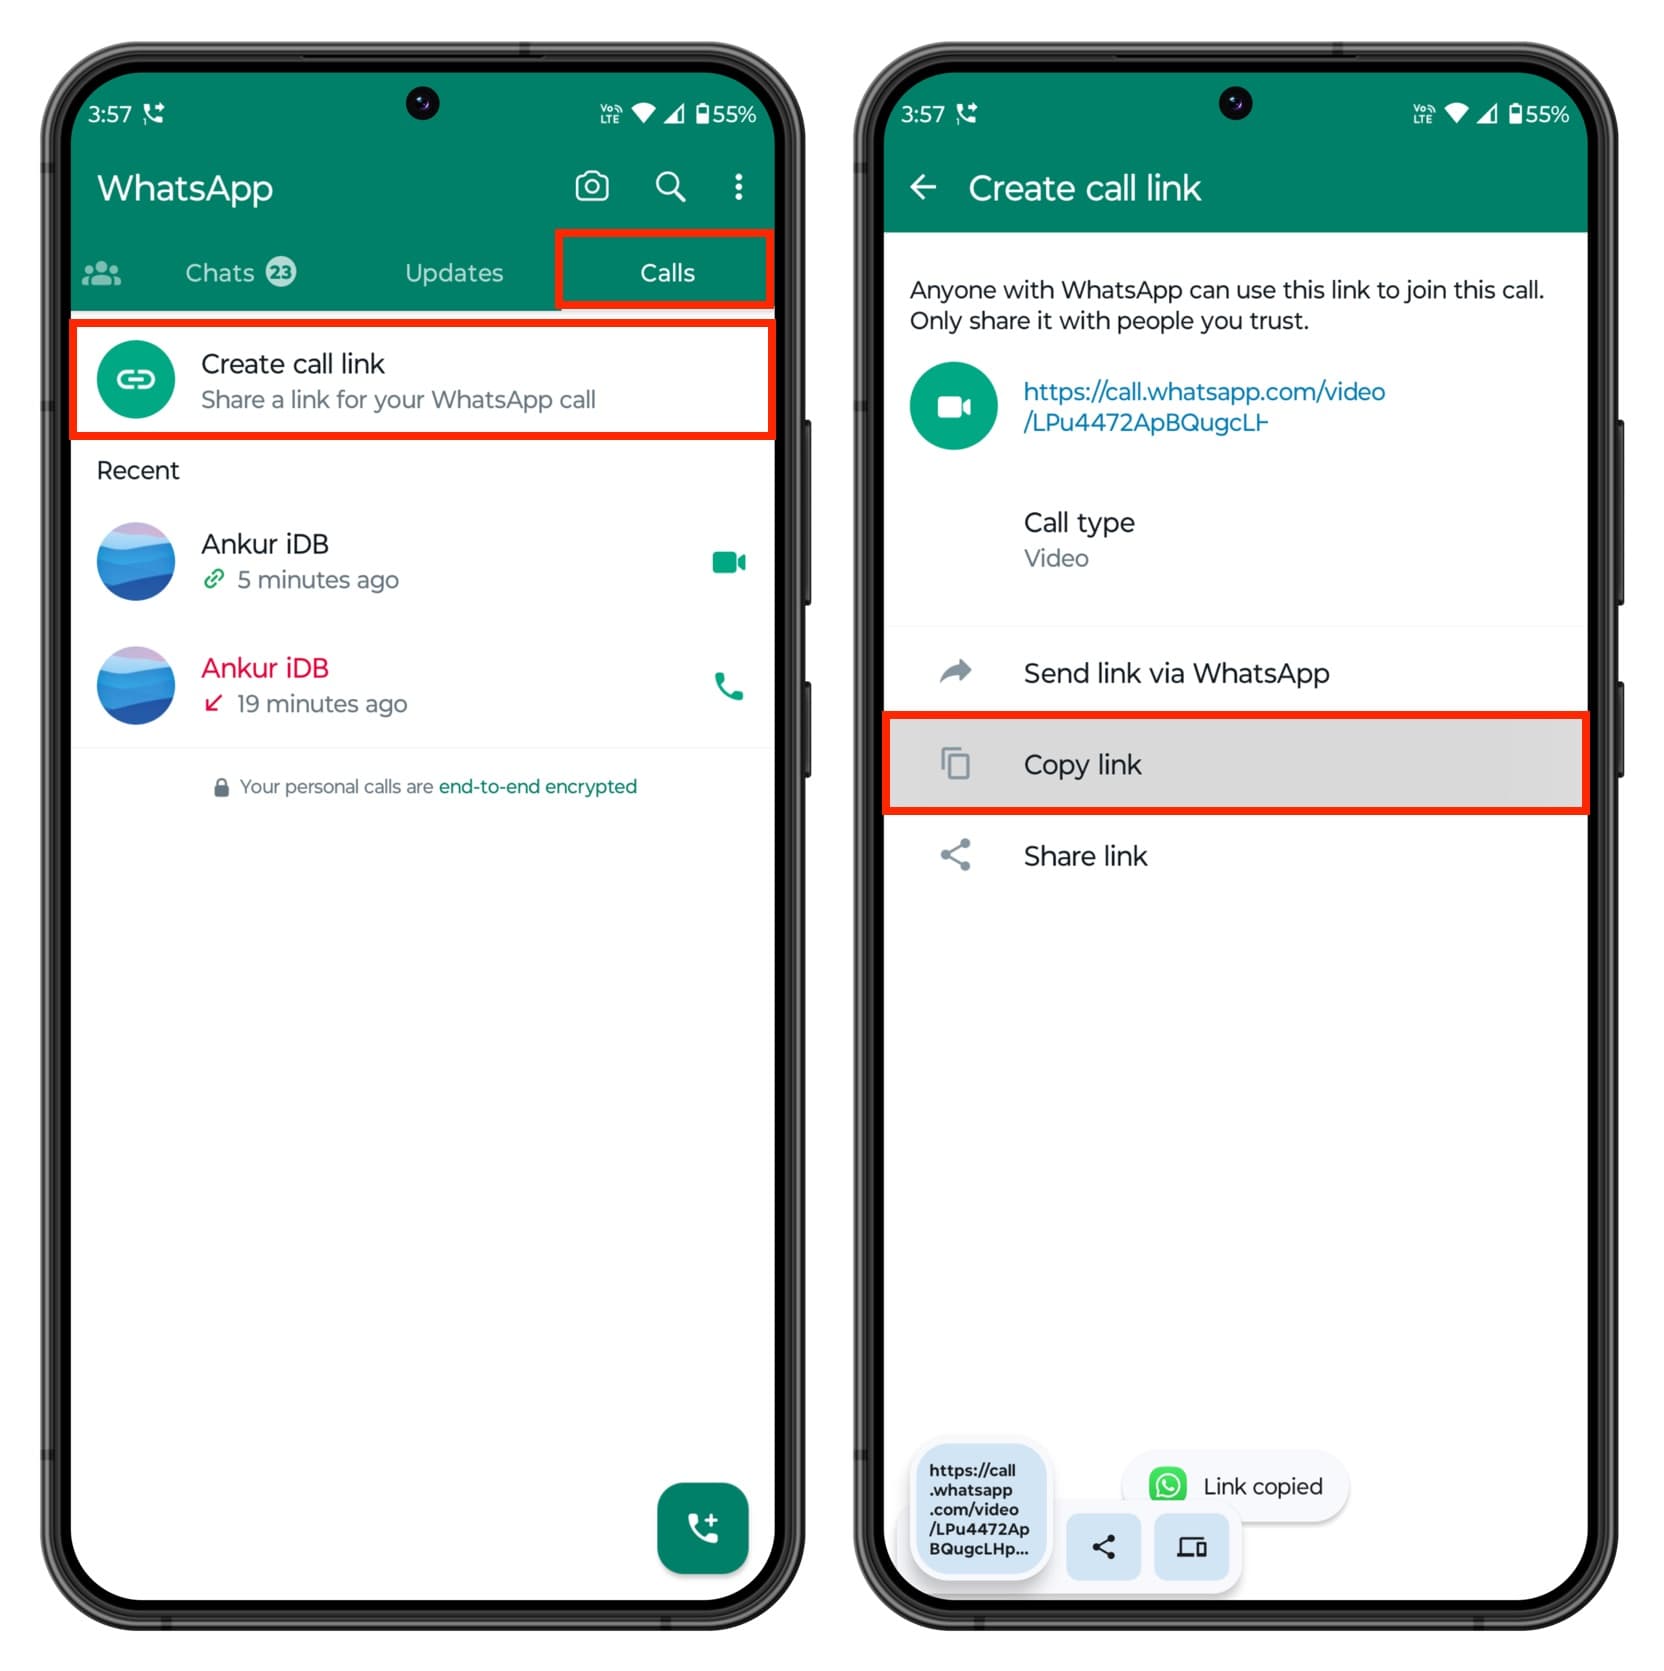 Create call link in WhatsApp on Android phone